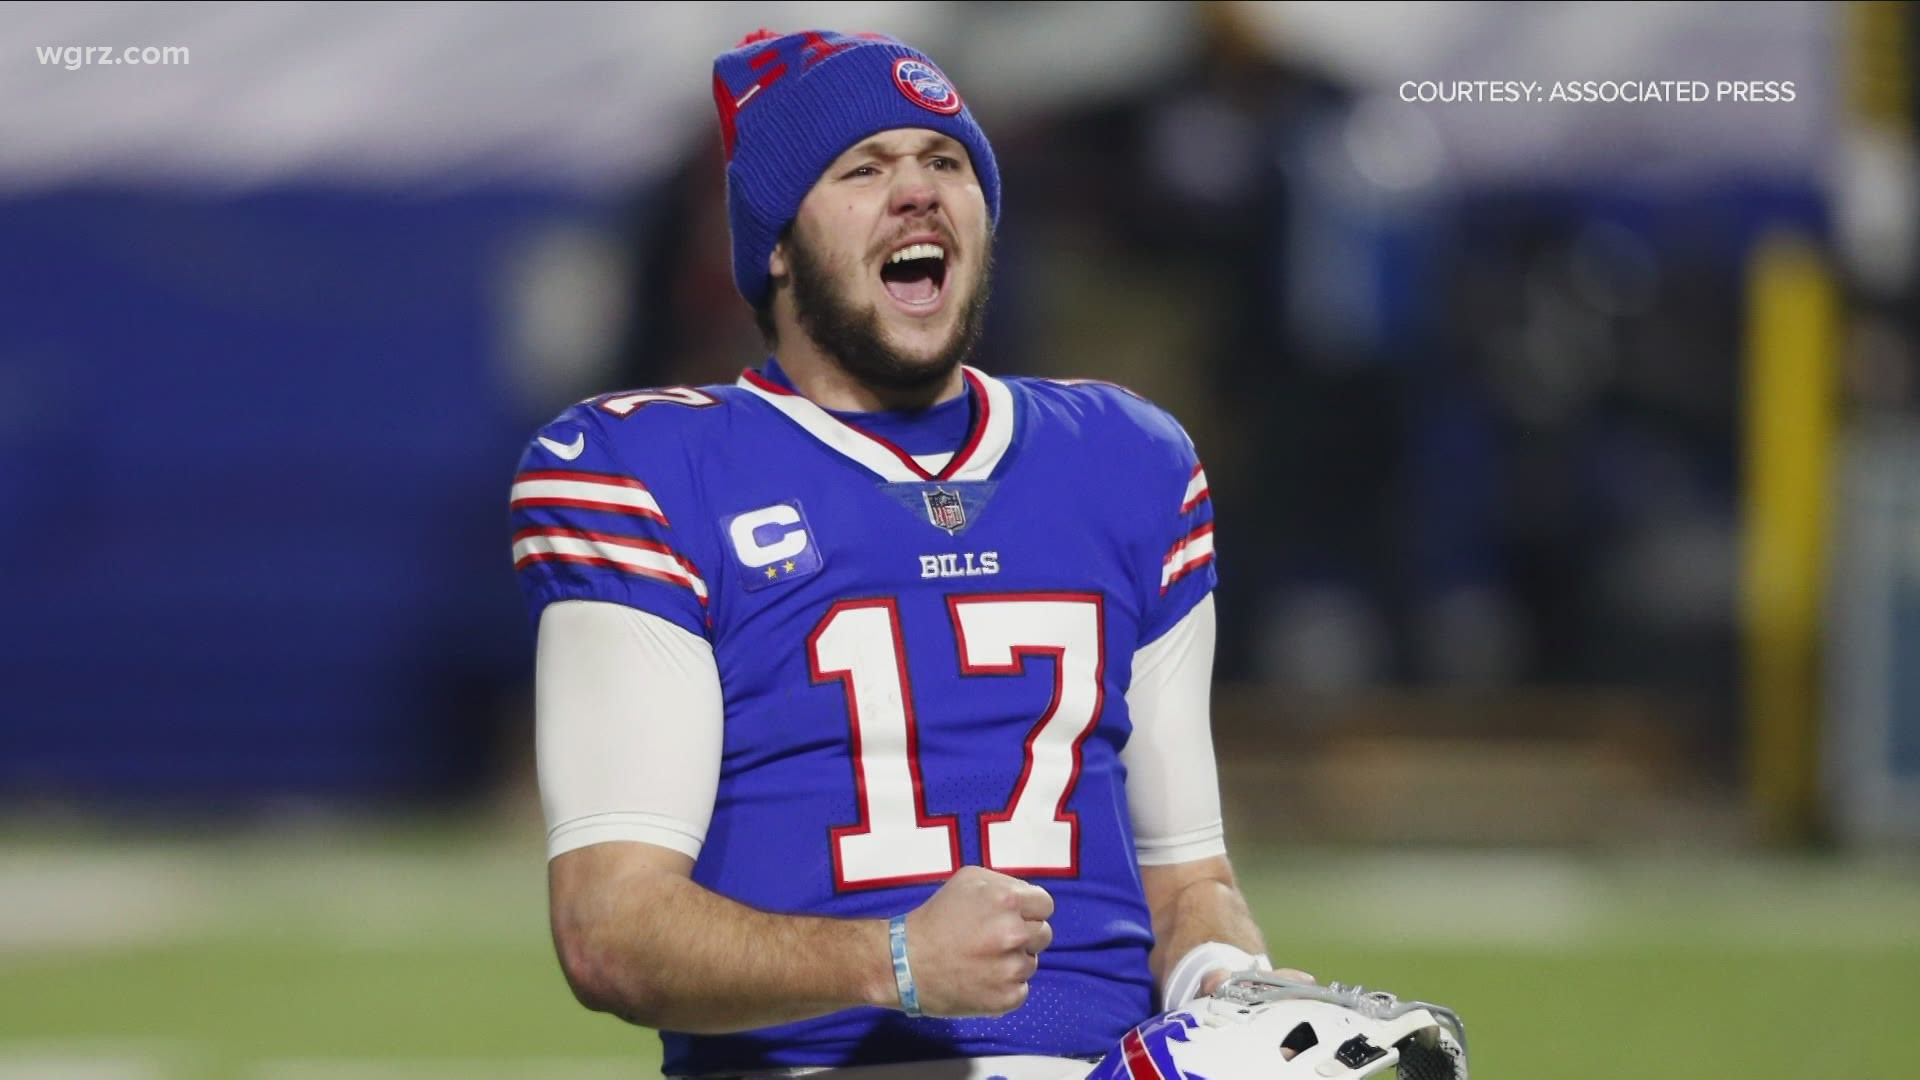 Buffalo Bills quarterback Josh Allen recently shared his thoughts about the vaccine on "10 Questions With Kyle Brandt."